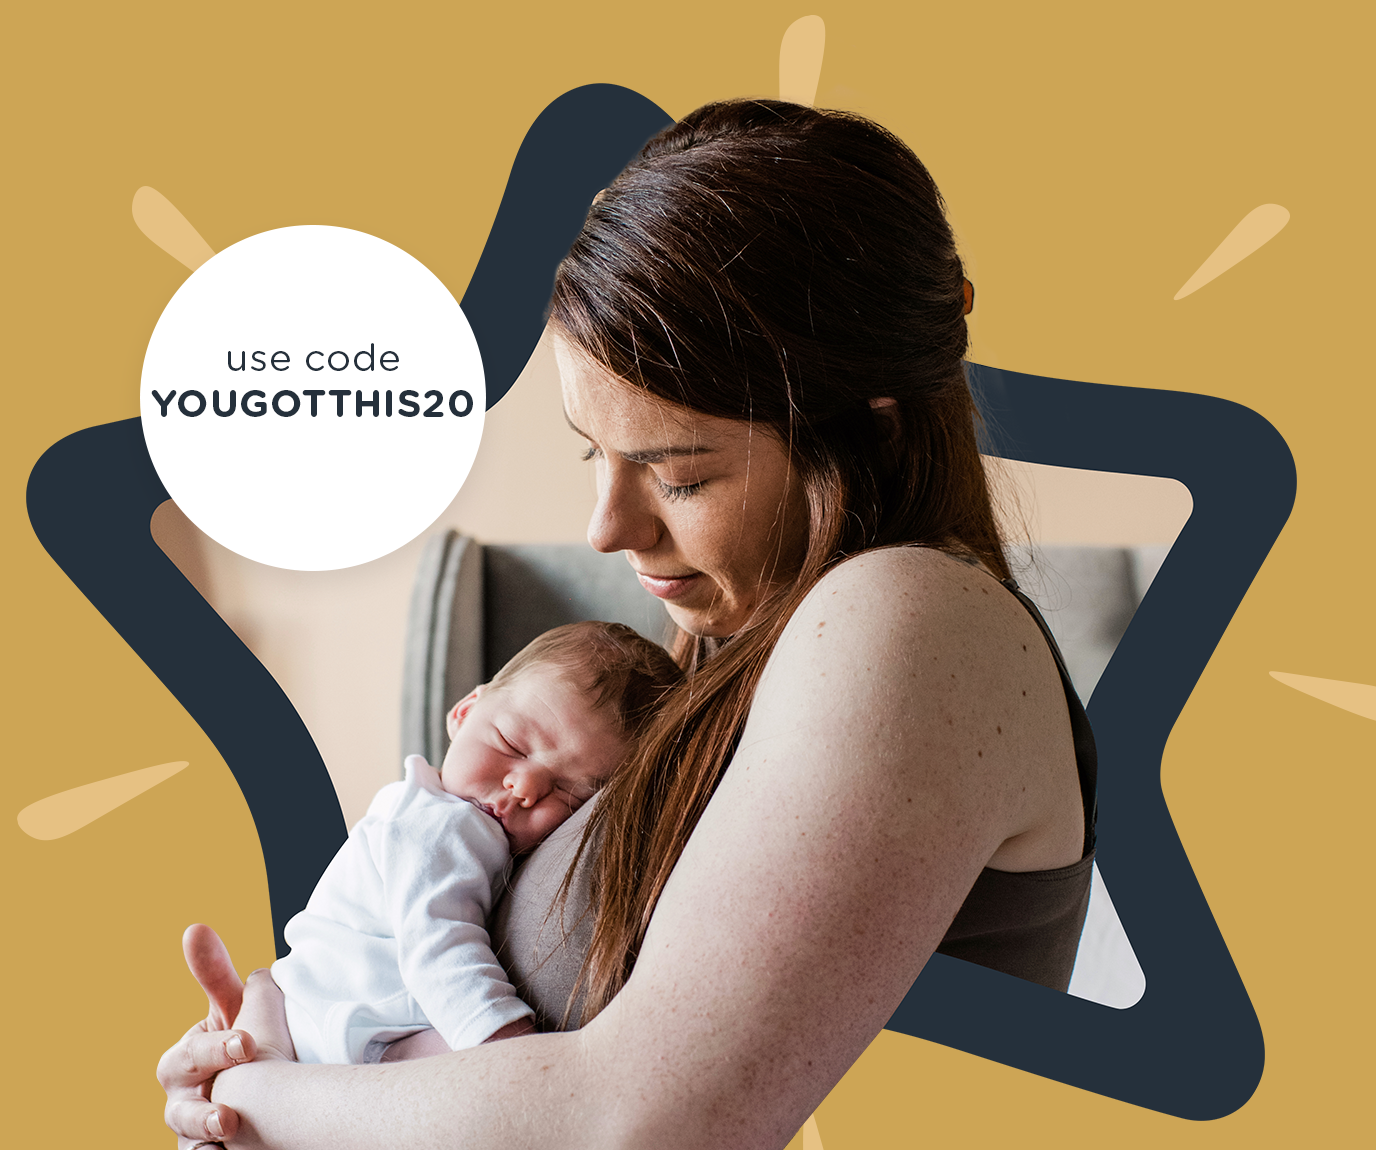 Mum holding a baby with YOUGOTTHIS20 code roundal on